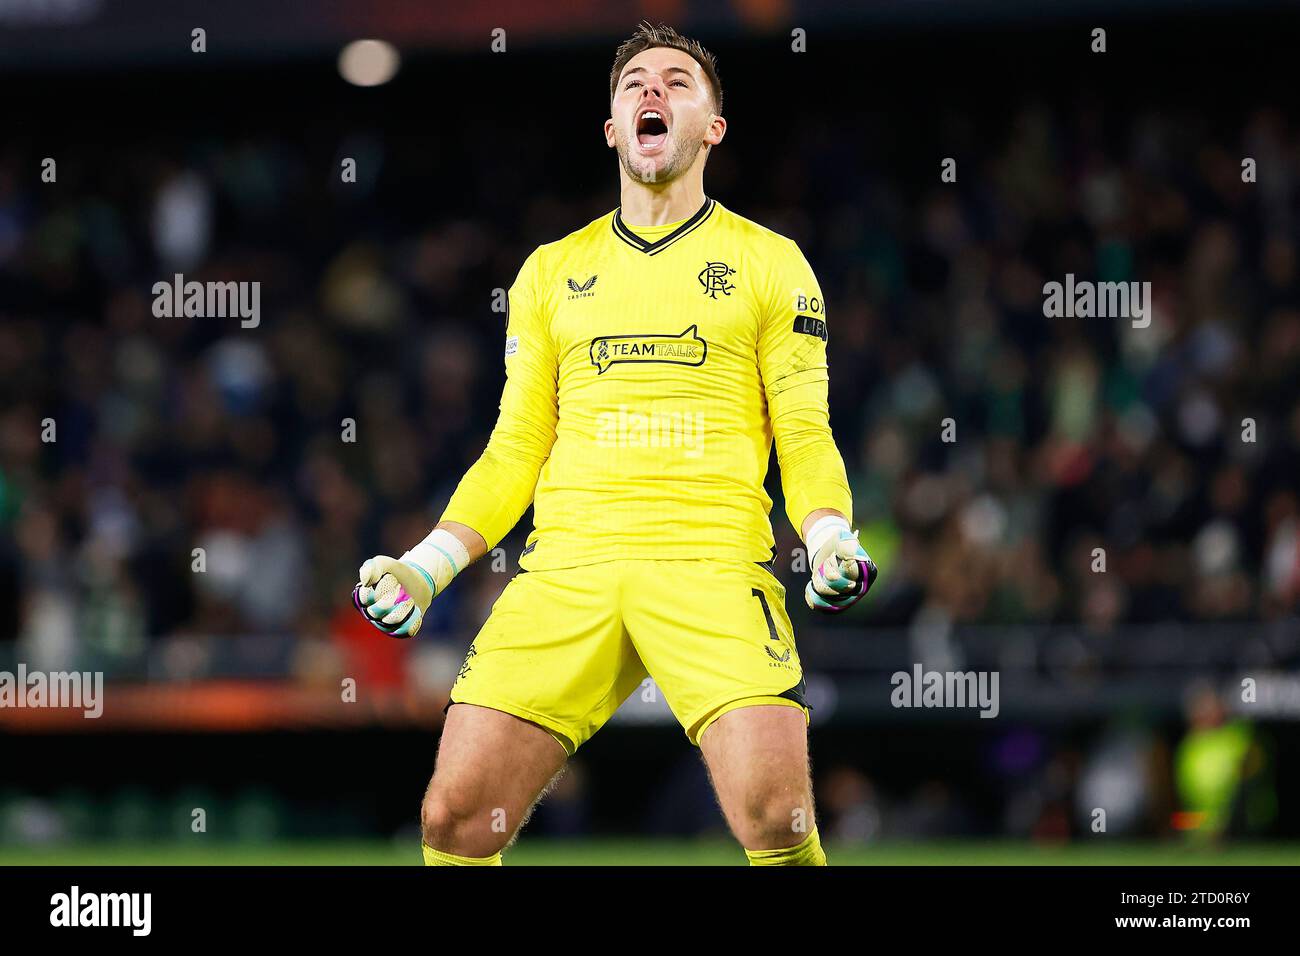 Seville, Spain. 14th December 2023. Goalkeeper Jack Butland (1) of Rangers seen during the UEFA Europa League match between Real Betis and Rangers at the Estadio Benito Villamarin in Seville. (Photo credit: Gonzales Photo - Andres Gongora). Credit: Gonzales Photo/Alamy Live News Stock Photo